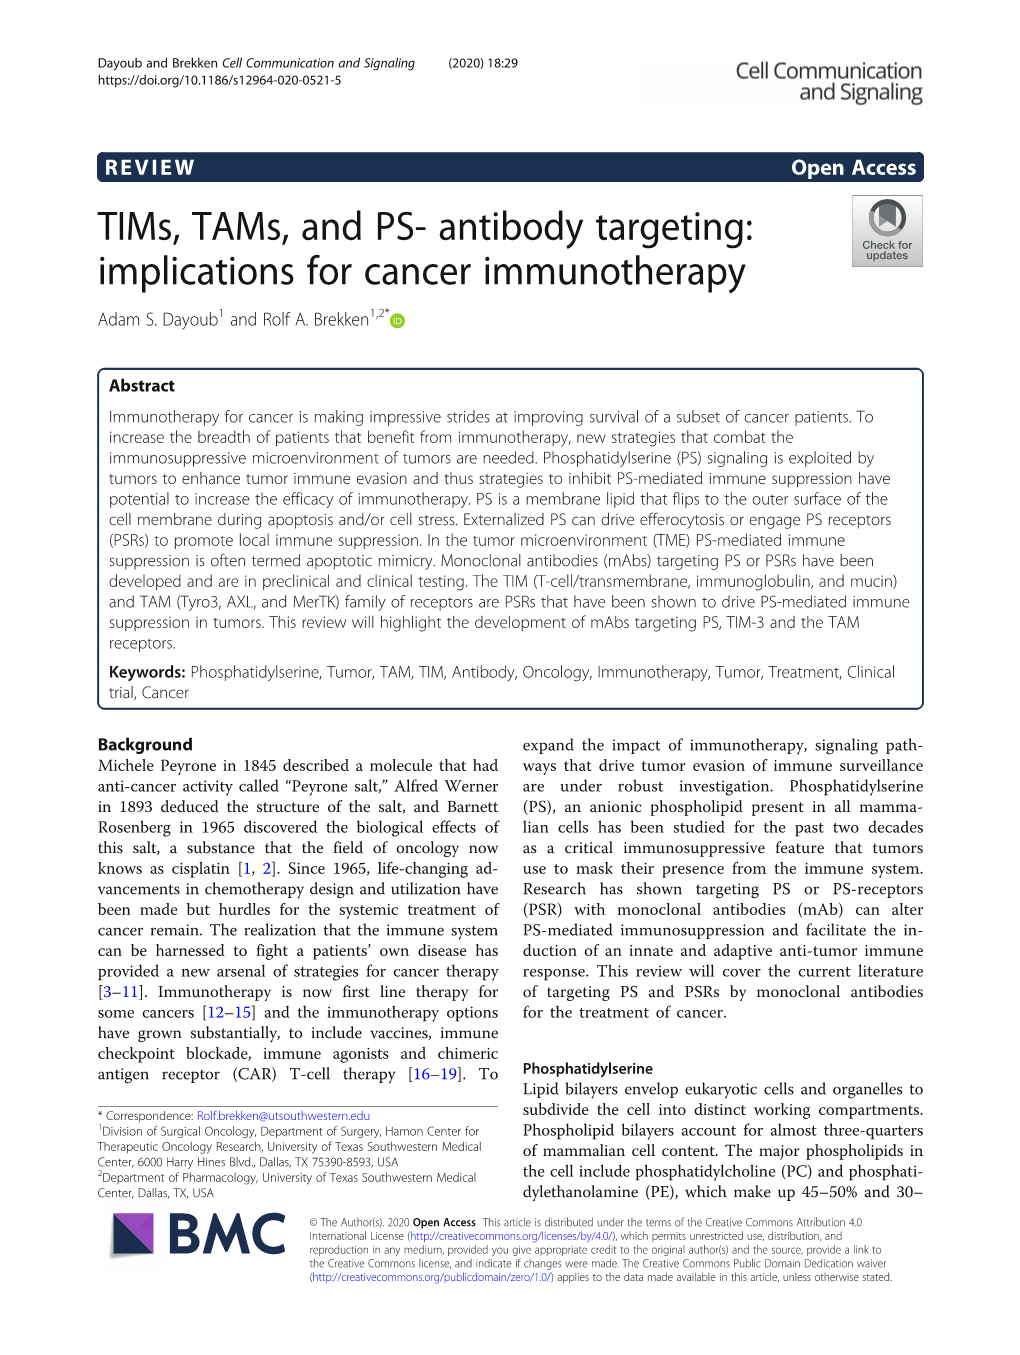 Antibody Targeting: Implications for Cancer Immunotherapy Adam S